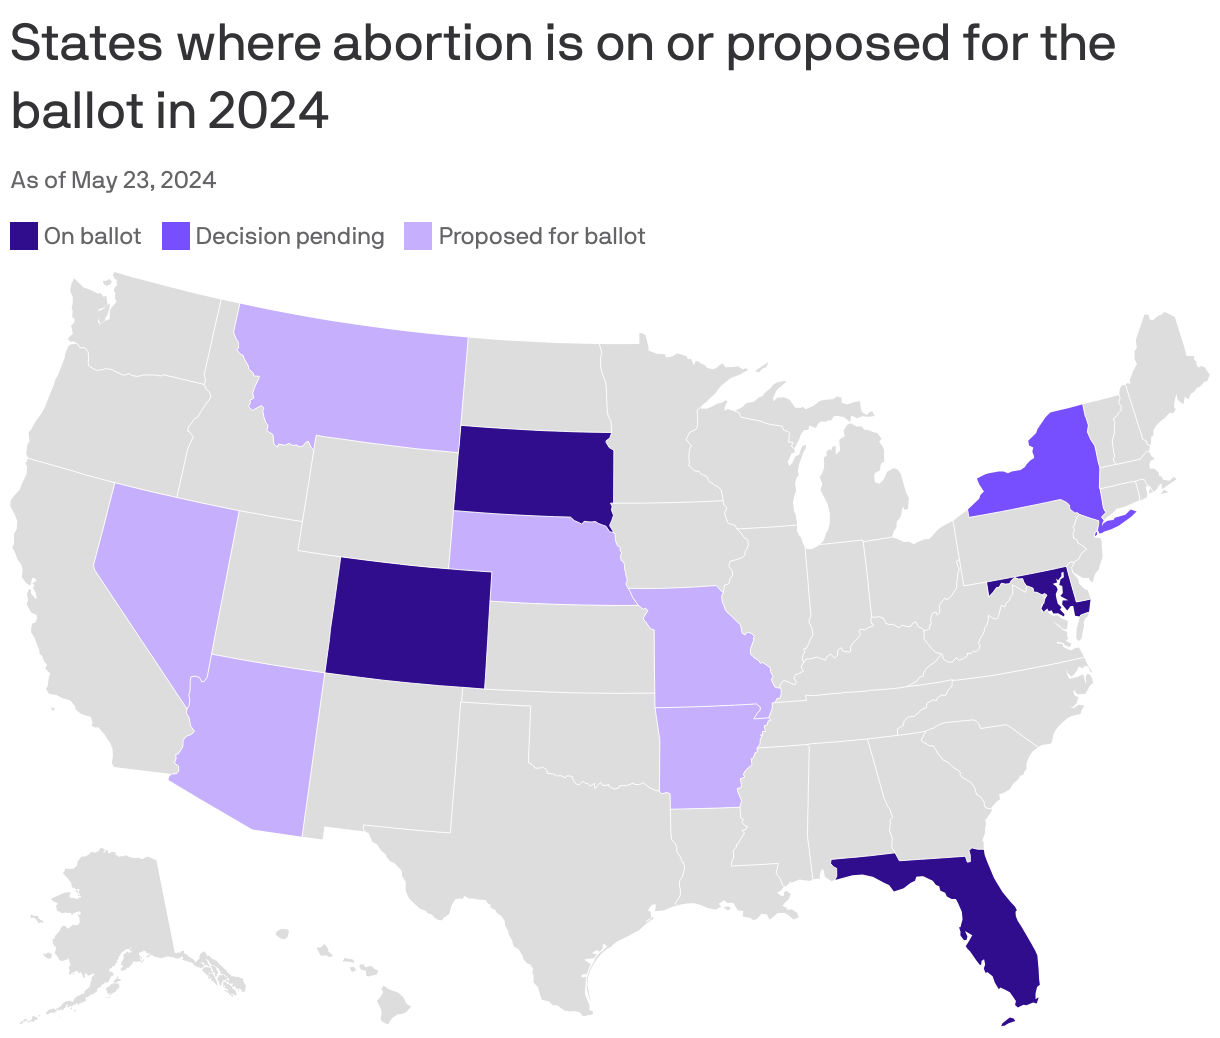 States where abortion is on or proposed for the ballot in 2024